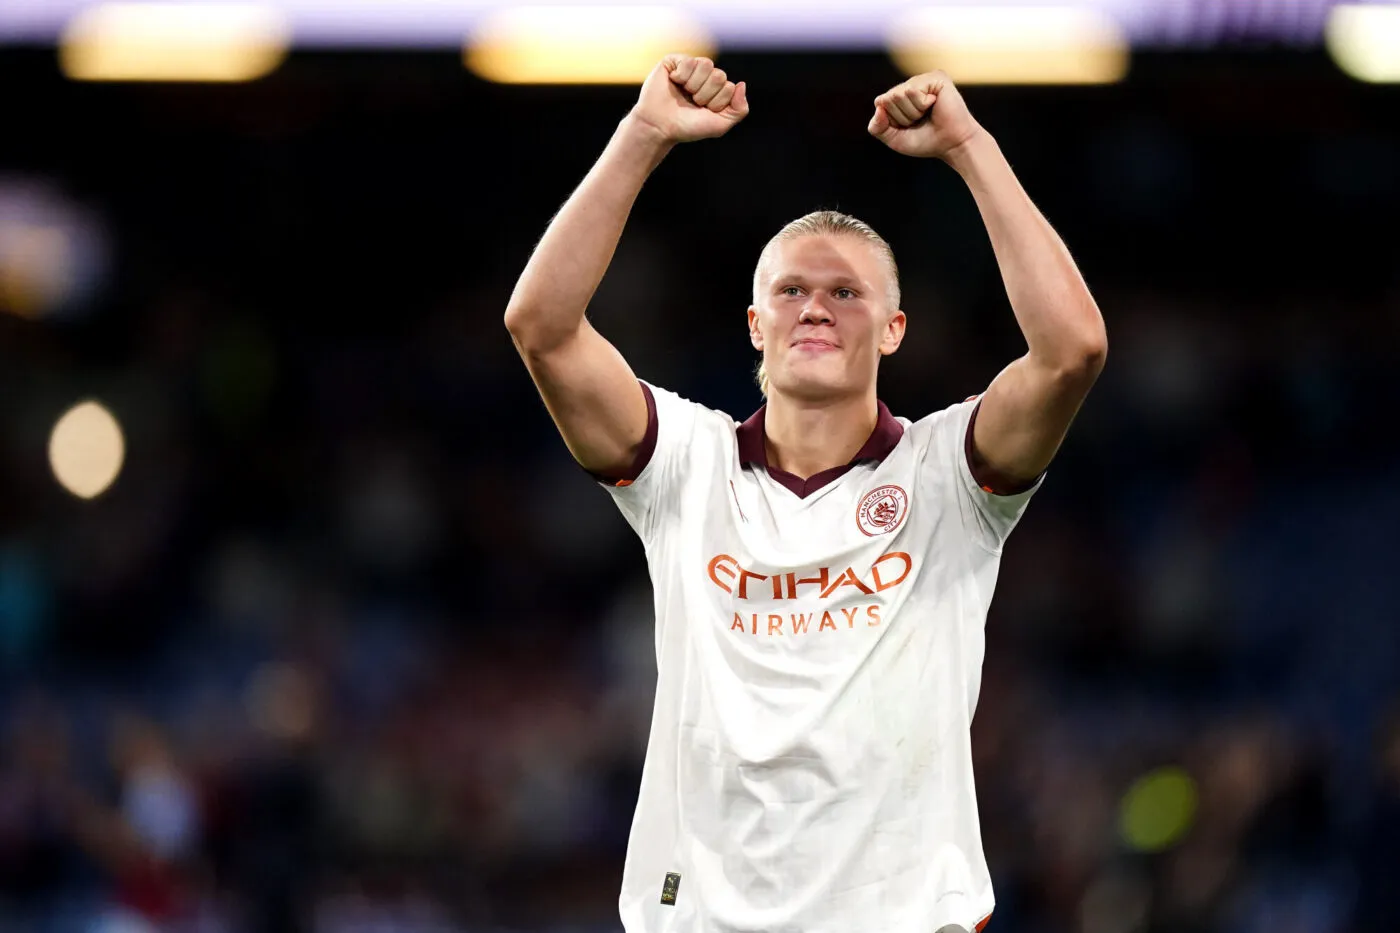 Manchester City's Erling Haaland celebrates victory after the final whistle in the Premier League match at Turf Moor, Burnley. Picture date: Friday August 11, 2023. - Photo by Icon sport